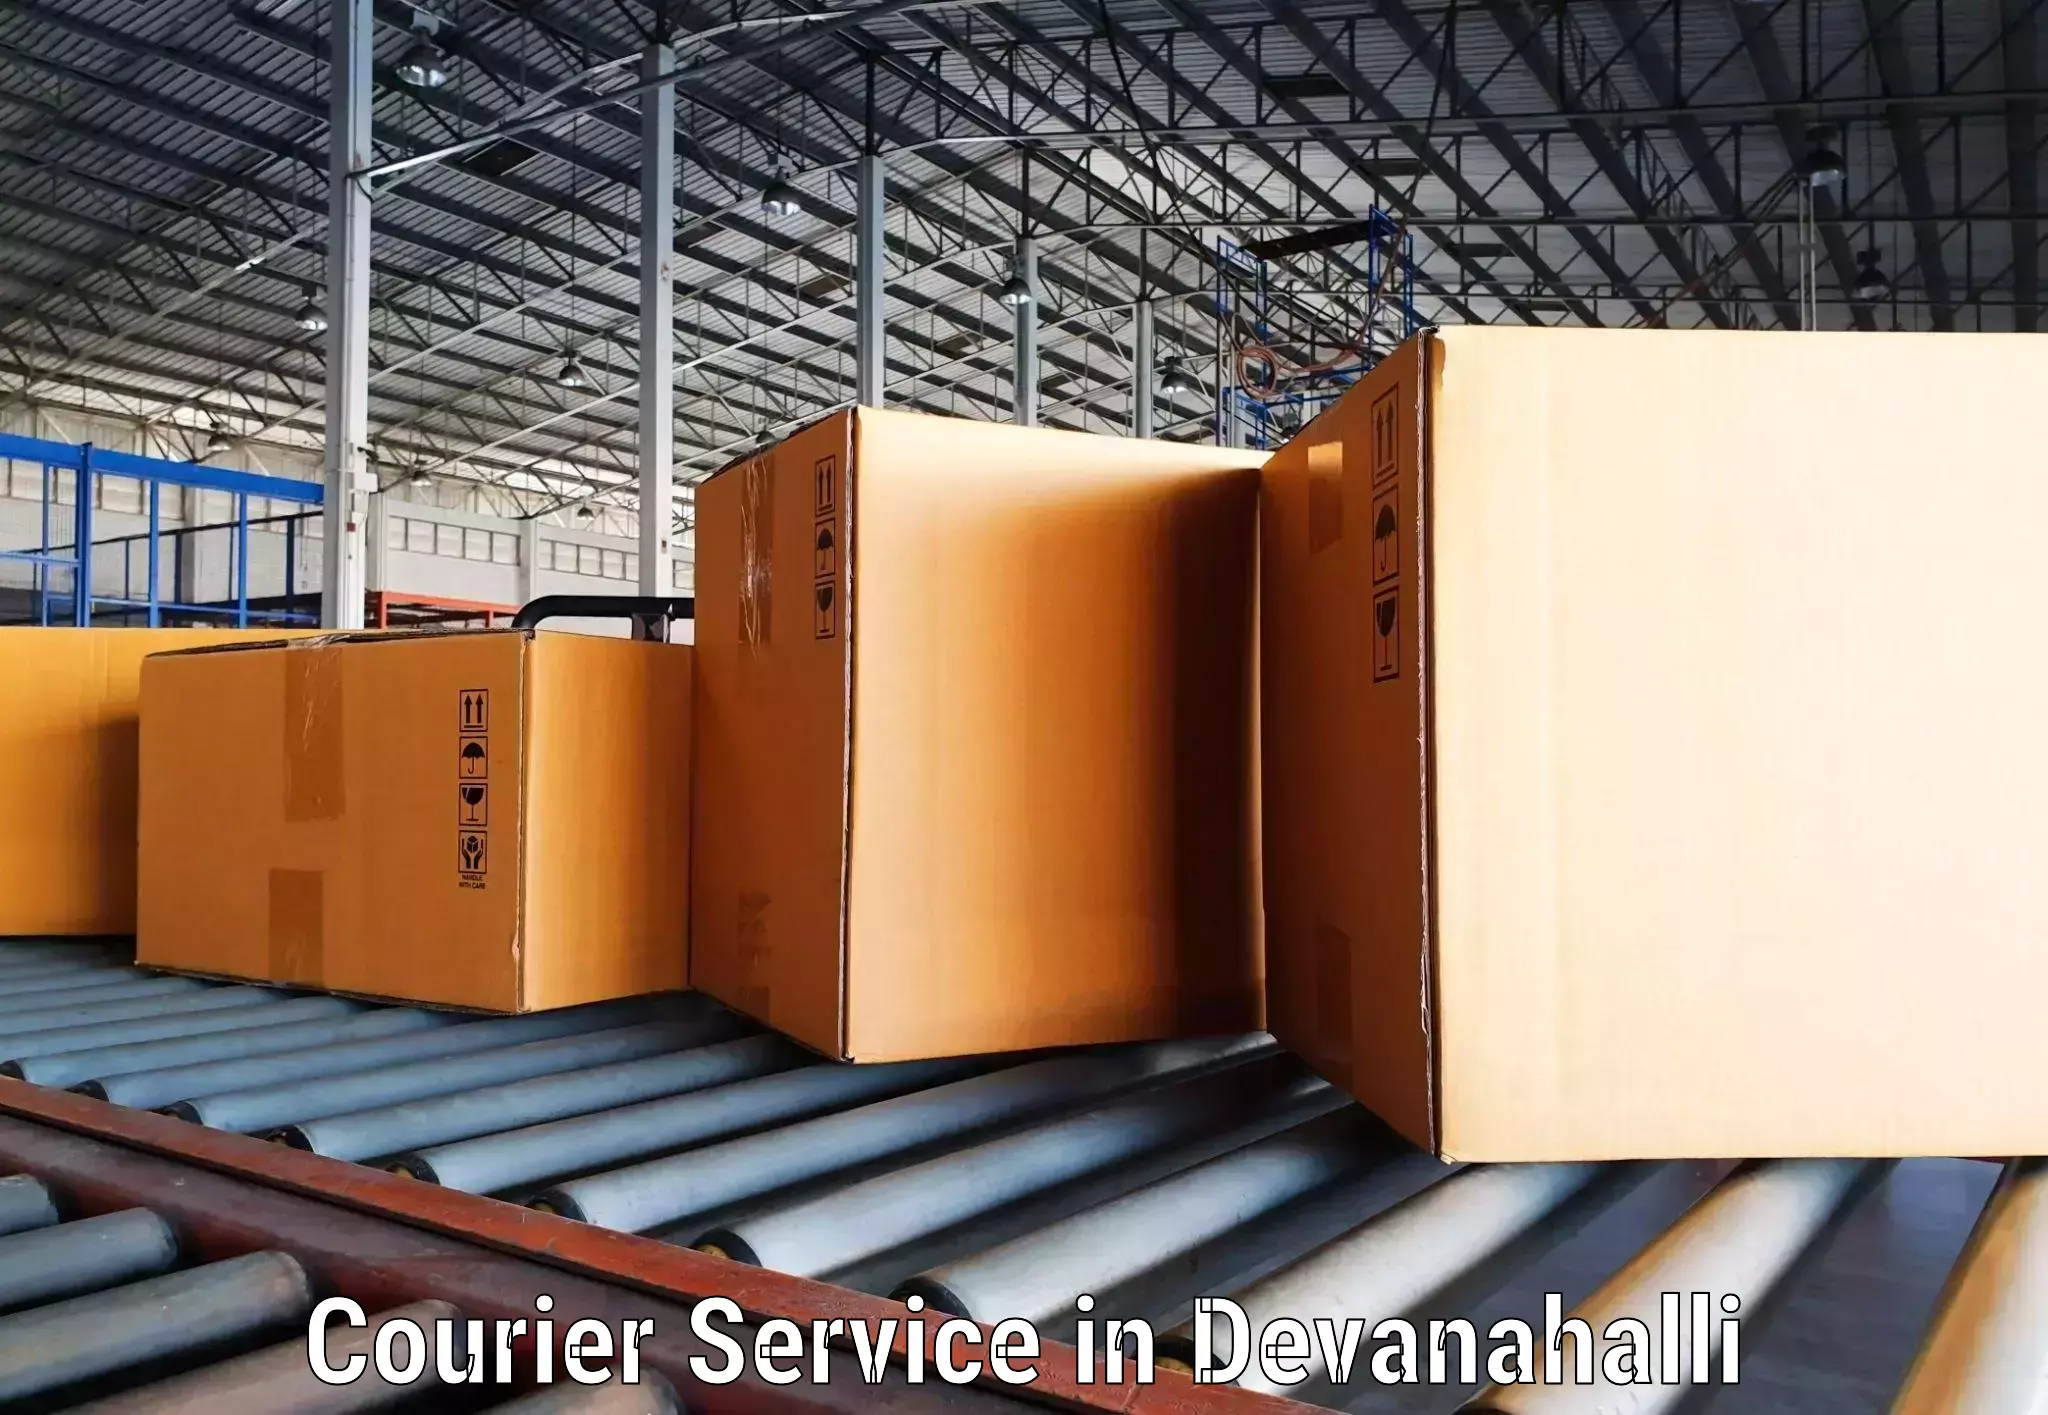 Parcel delivery automation in Devanahalli